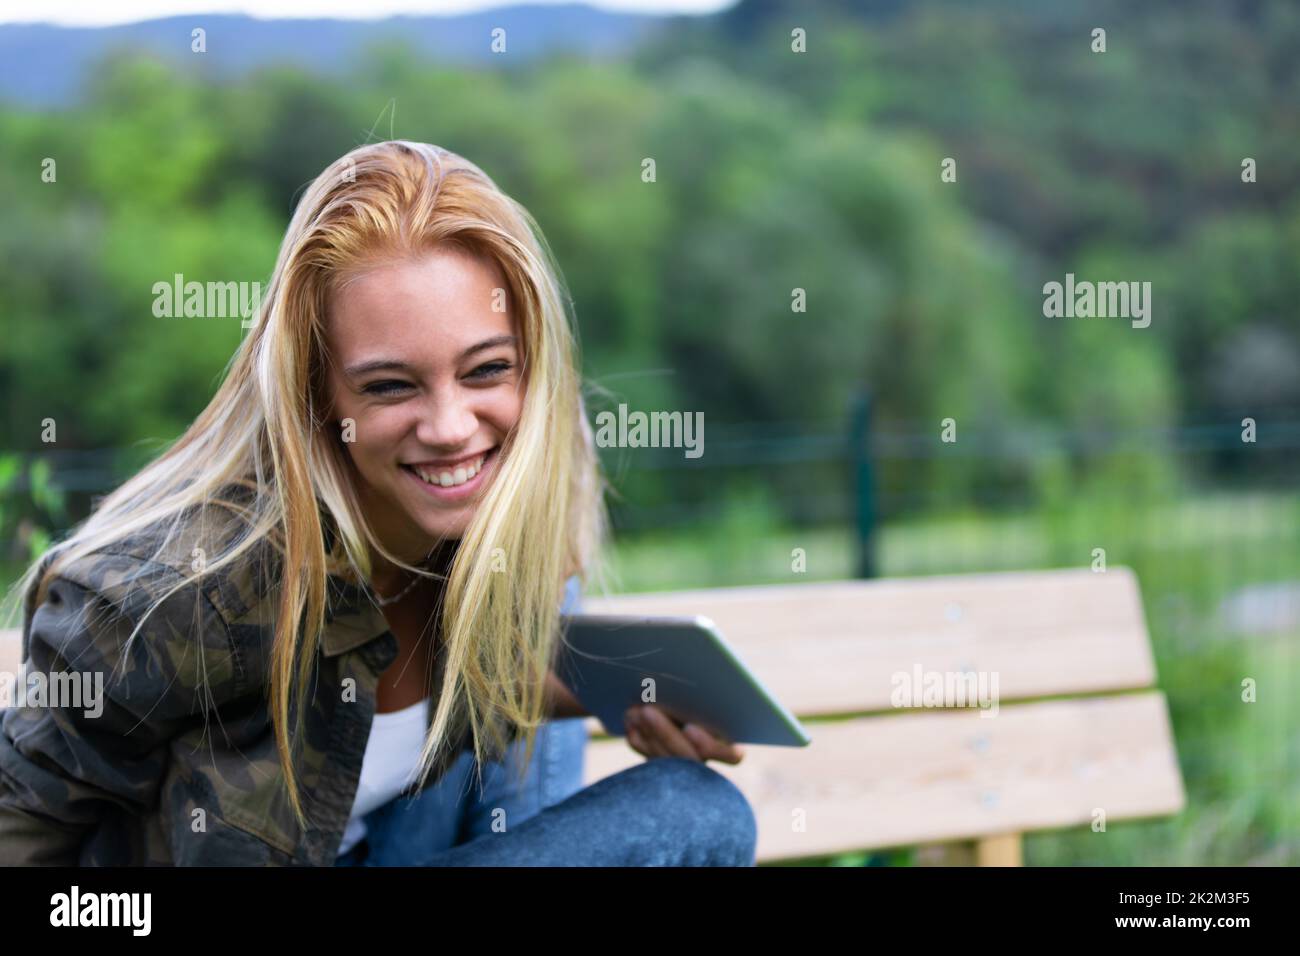 Fun playful young woman laughing at the camera Stock Photo